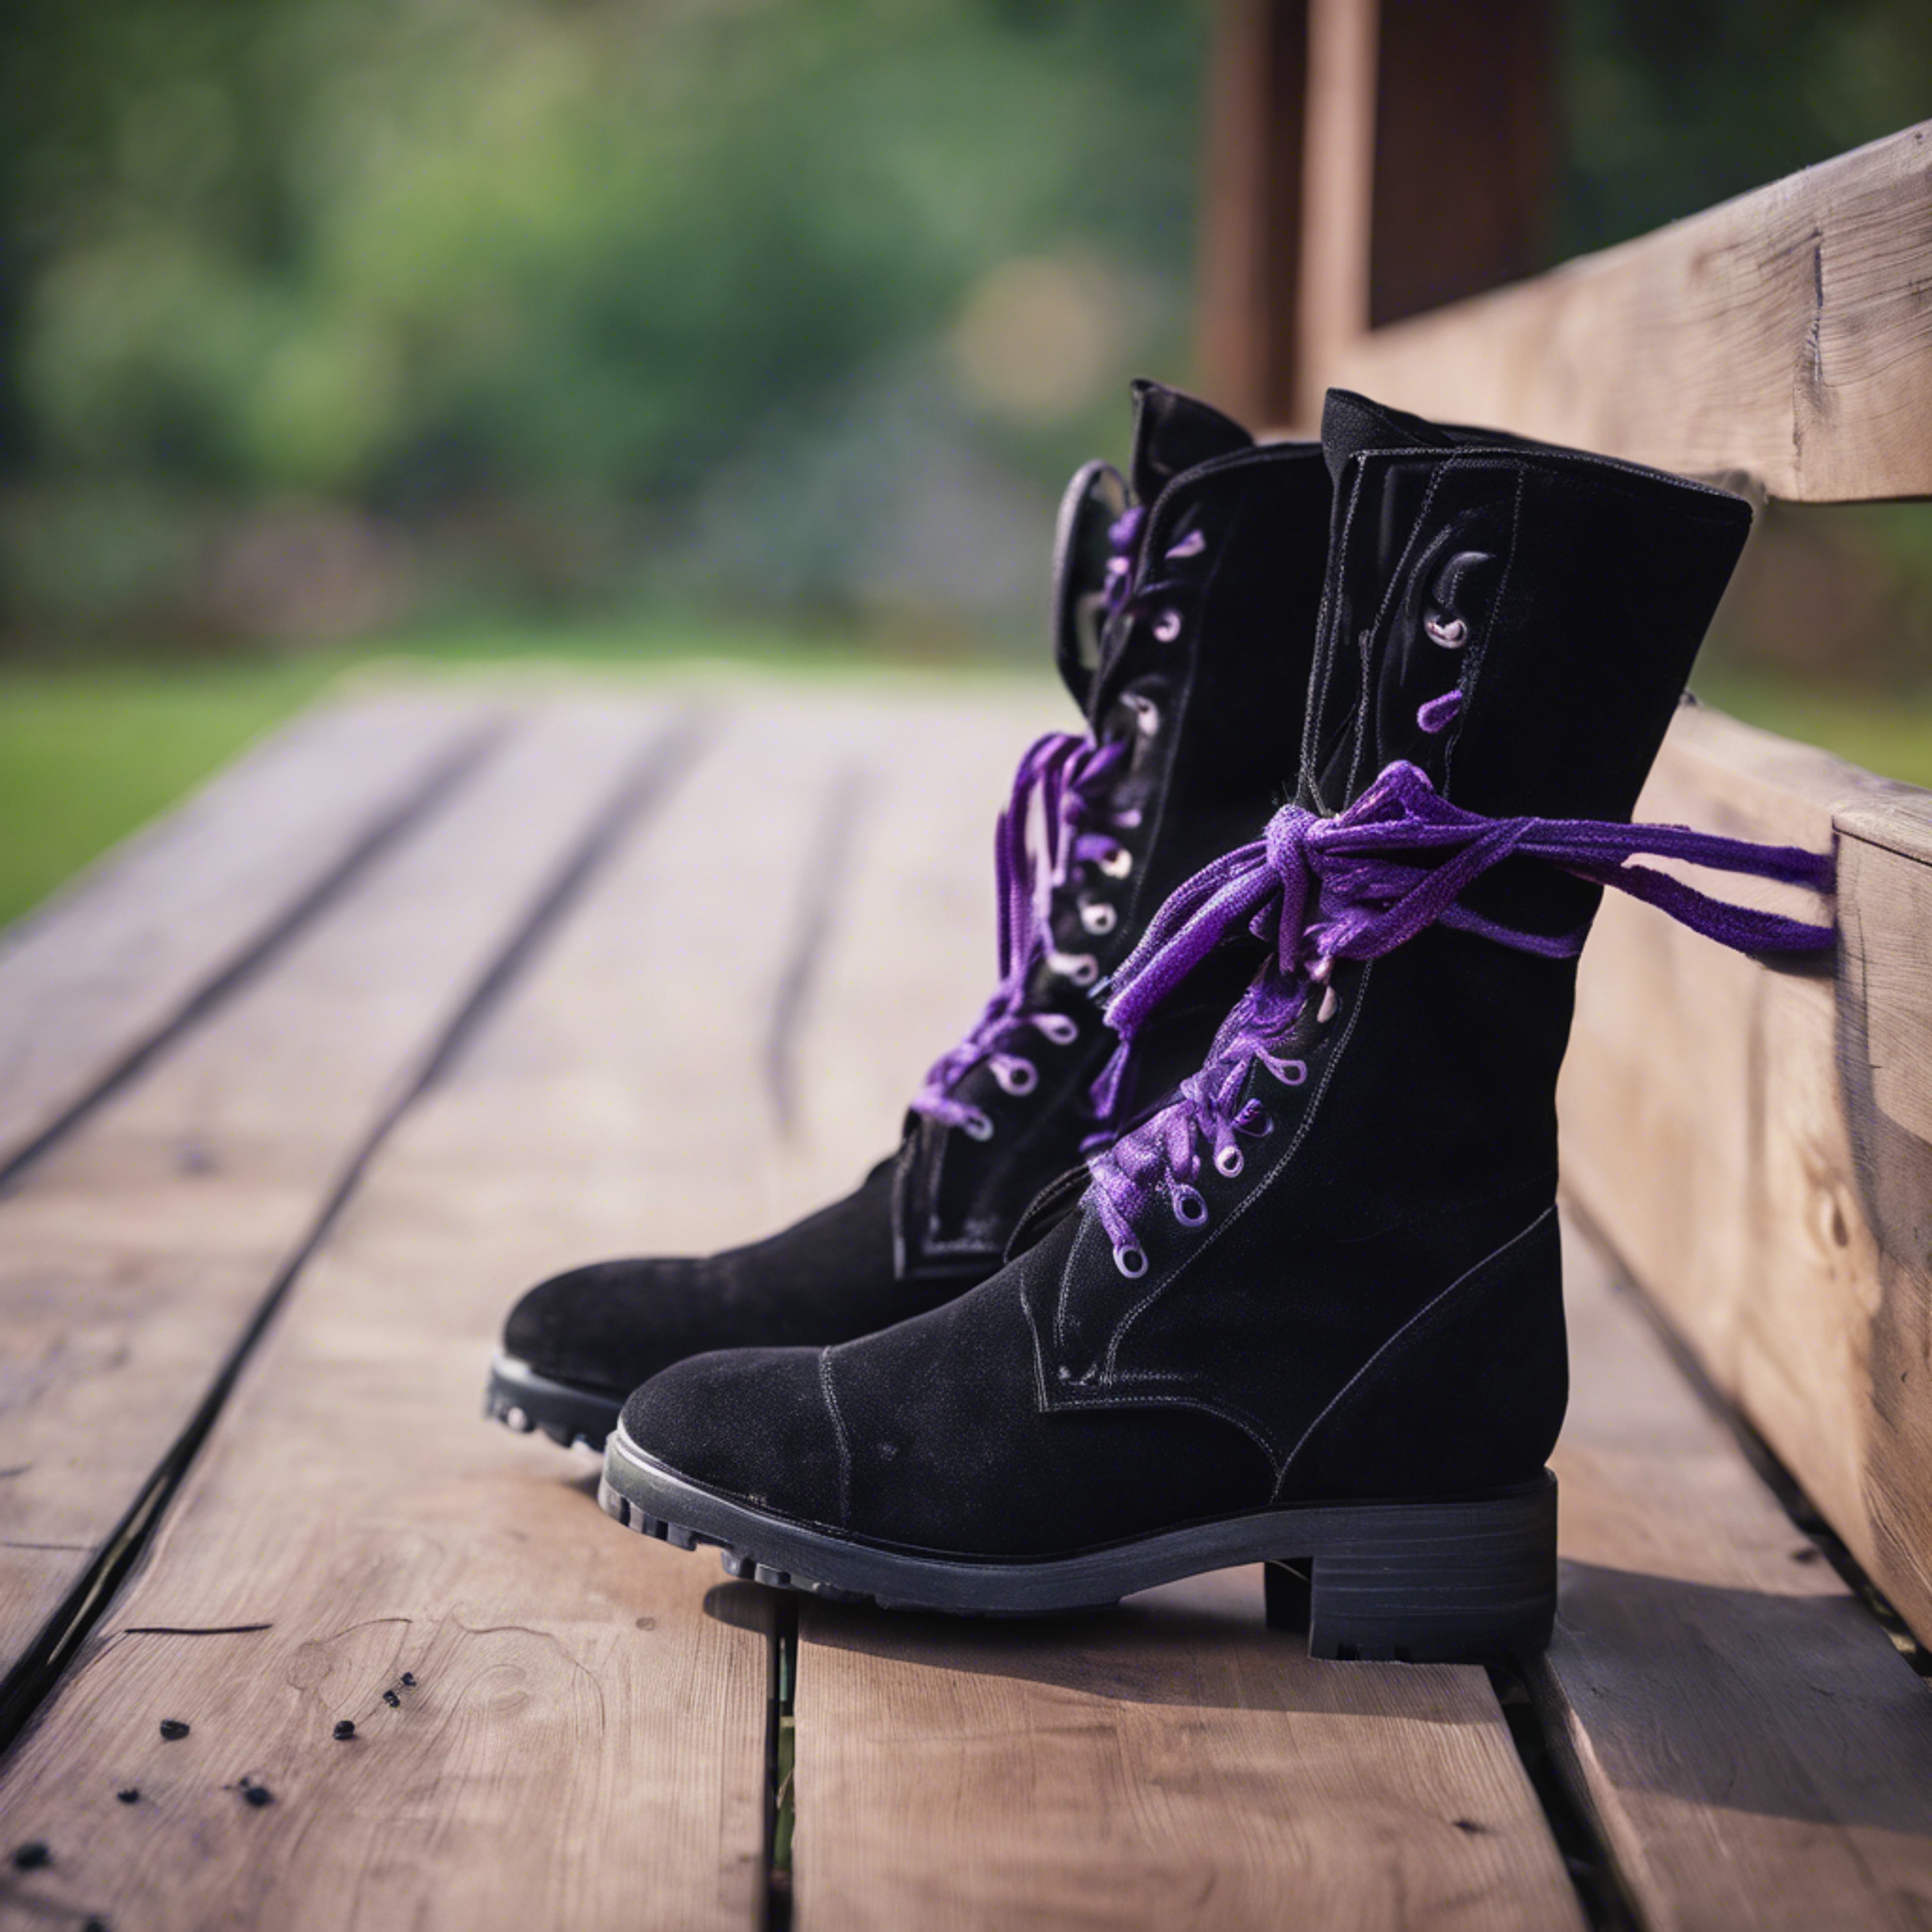 A pair of black suede boots with purple laces left casually on a wooden porch. 벽지[fedd81ee4b6b40088ba0]